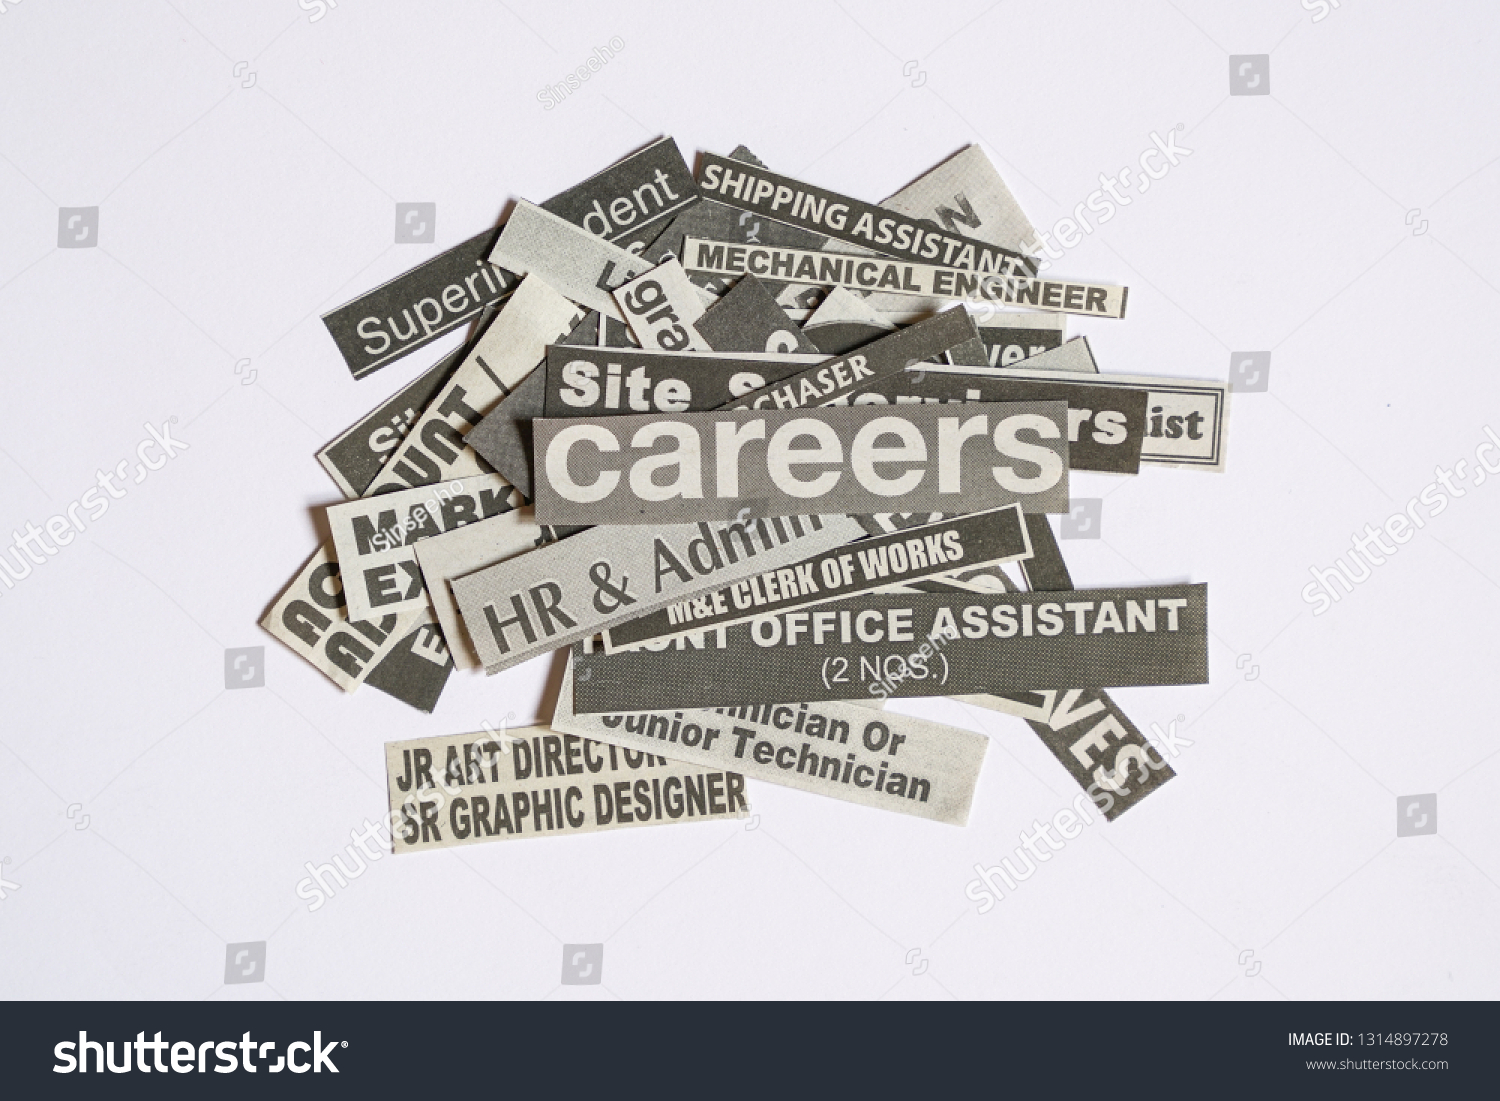 Jobs or careers concept: job titles or occupations cut off from newspaper and with Careers on top of the pile #1314897278